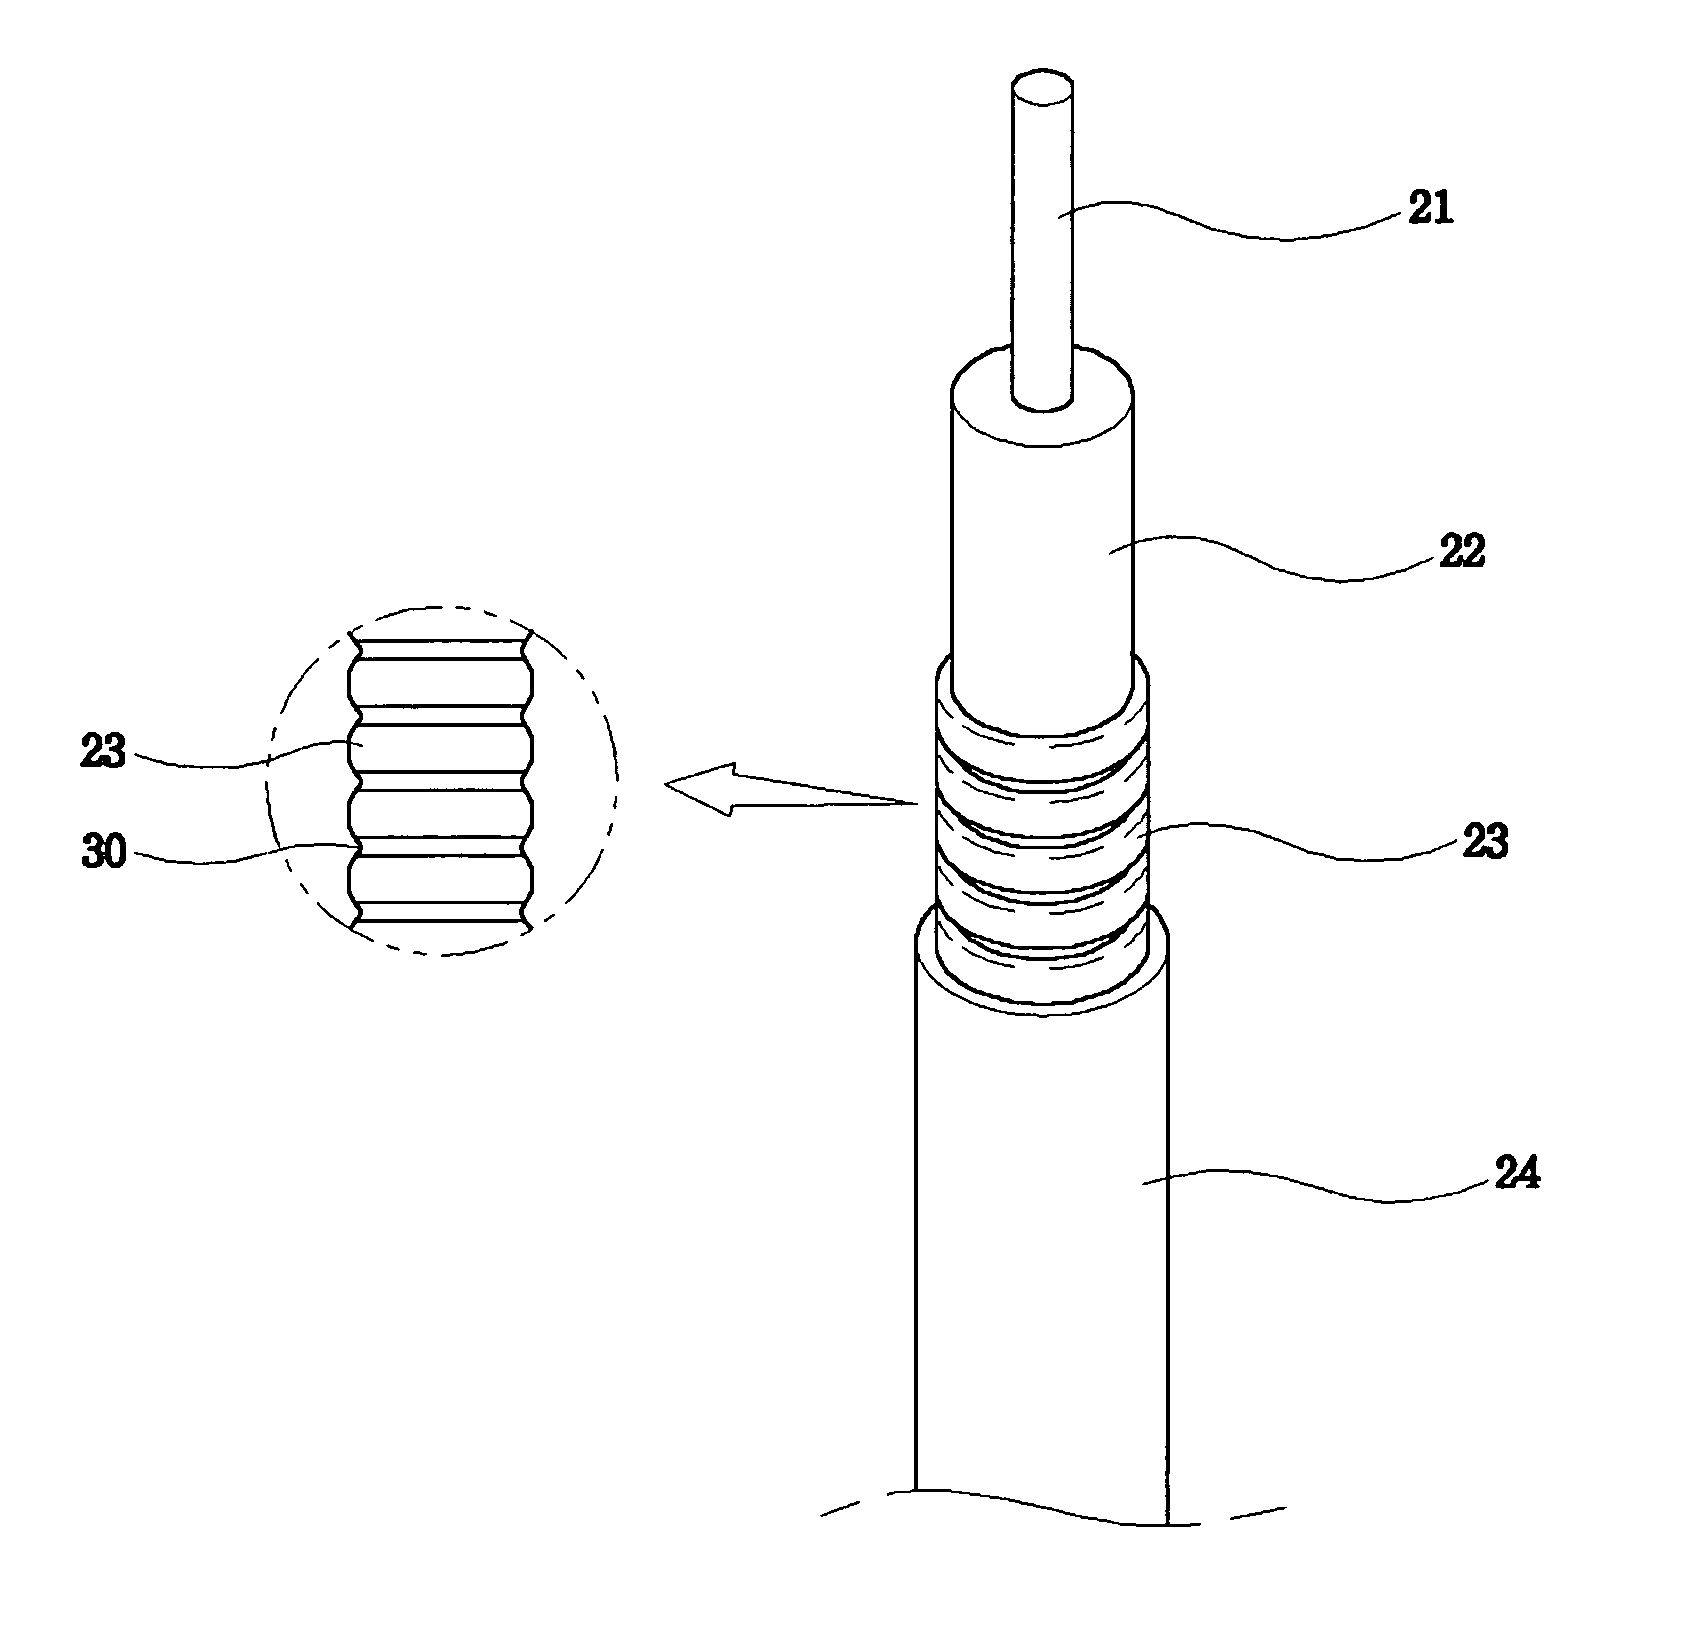 Reception antenna of tire pressure monitoring system using radiating leakage coaxial cable